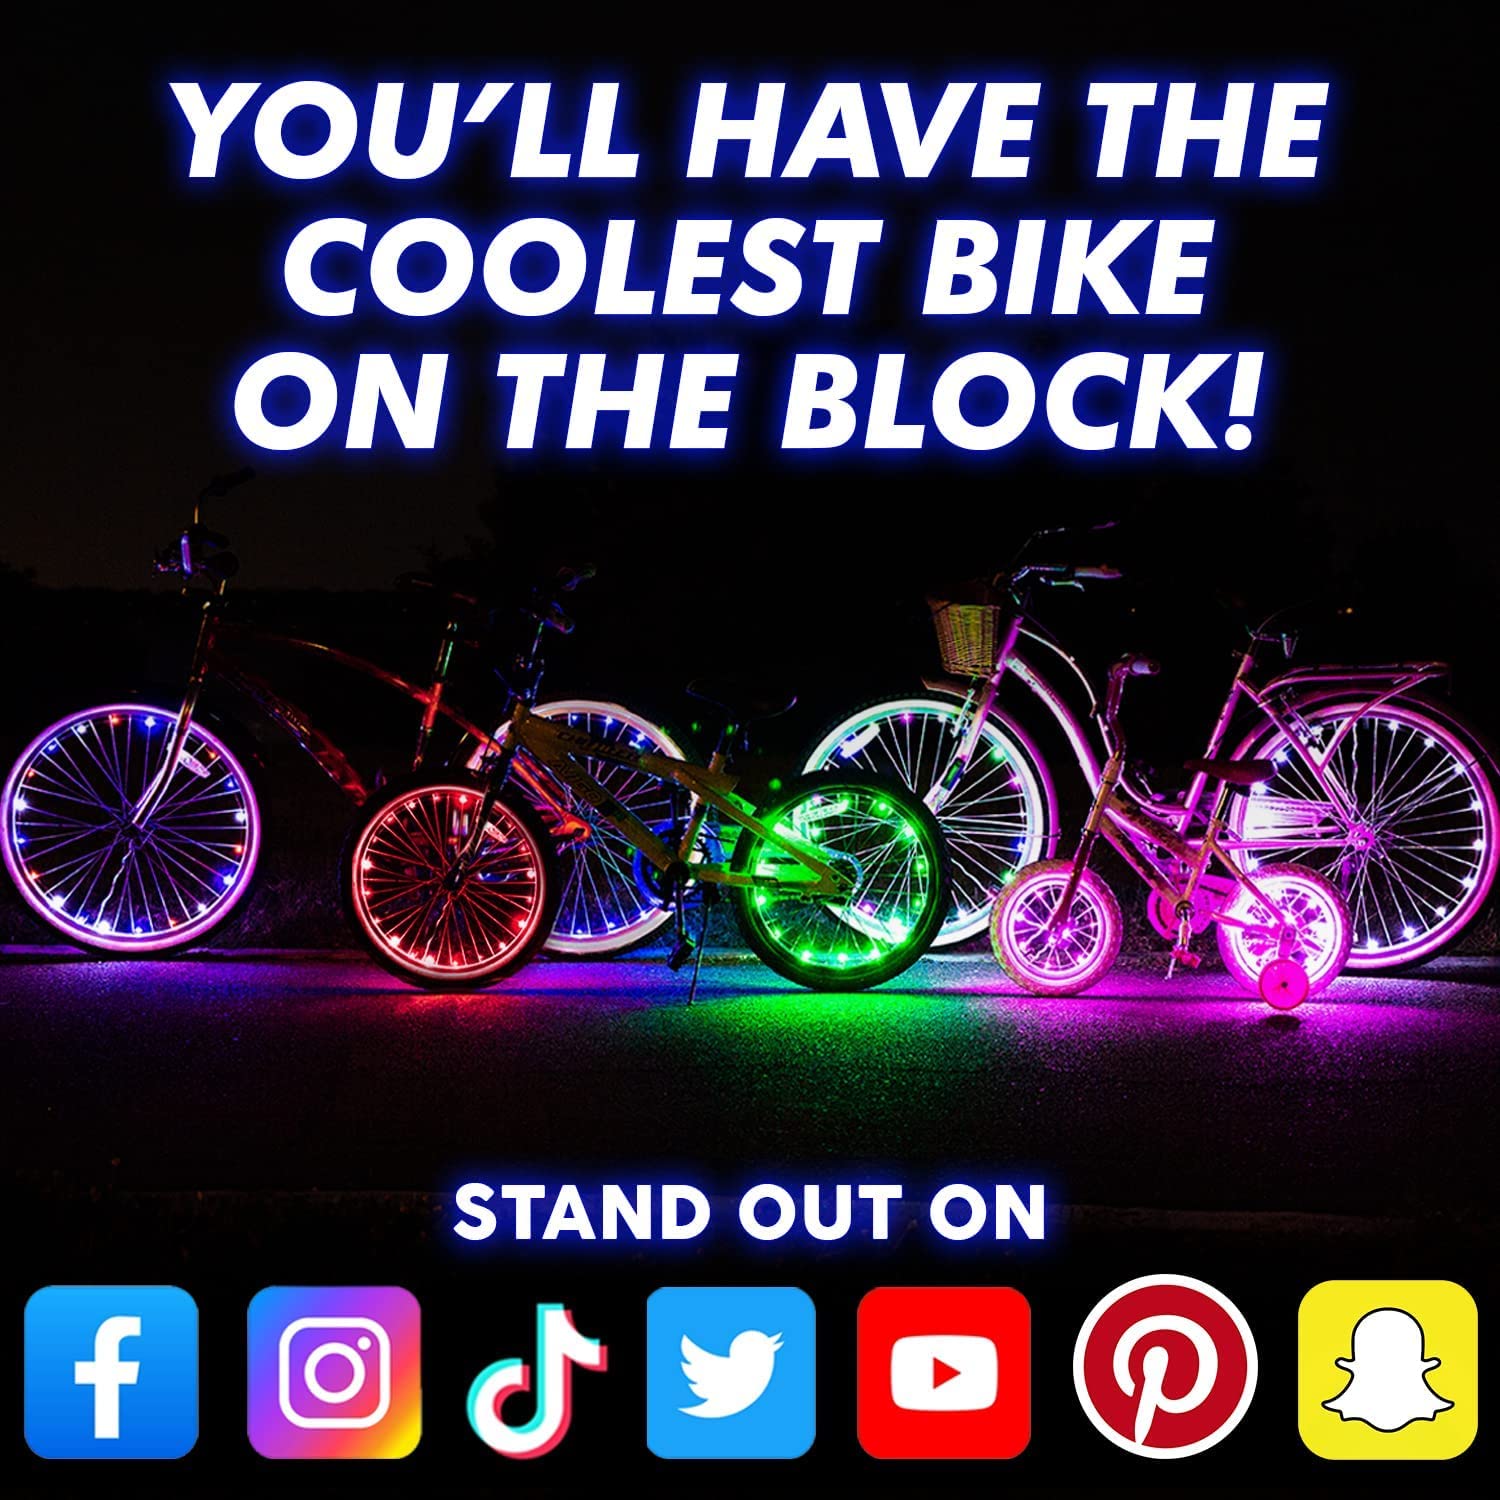 Activ Life LED Bike Wheel Lights with Batteries Included! Get 100% Brighter and Visible from All Angles for Ultimate Safety & Style (1 Tire Pack)